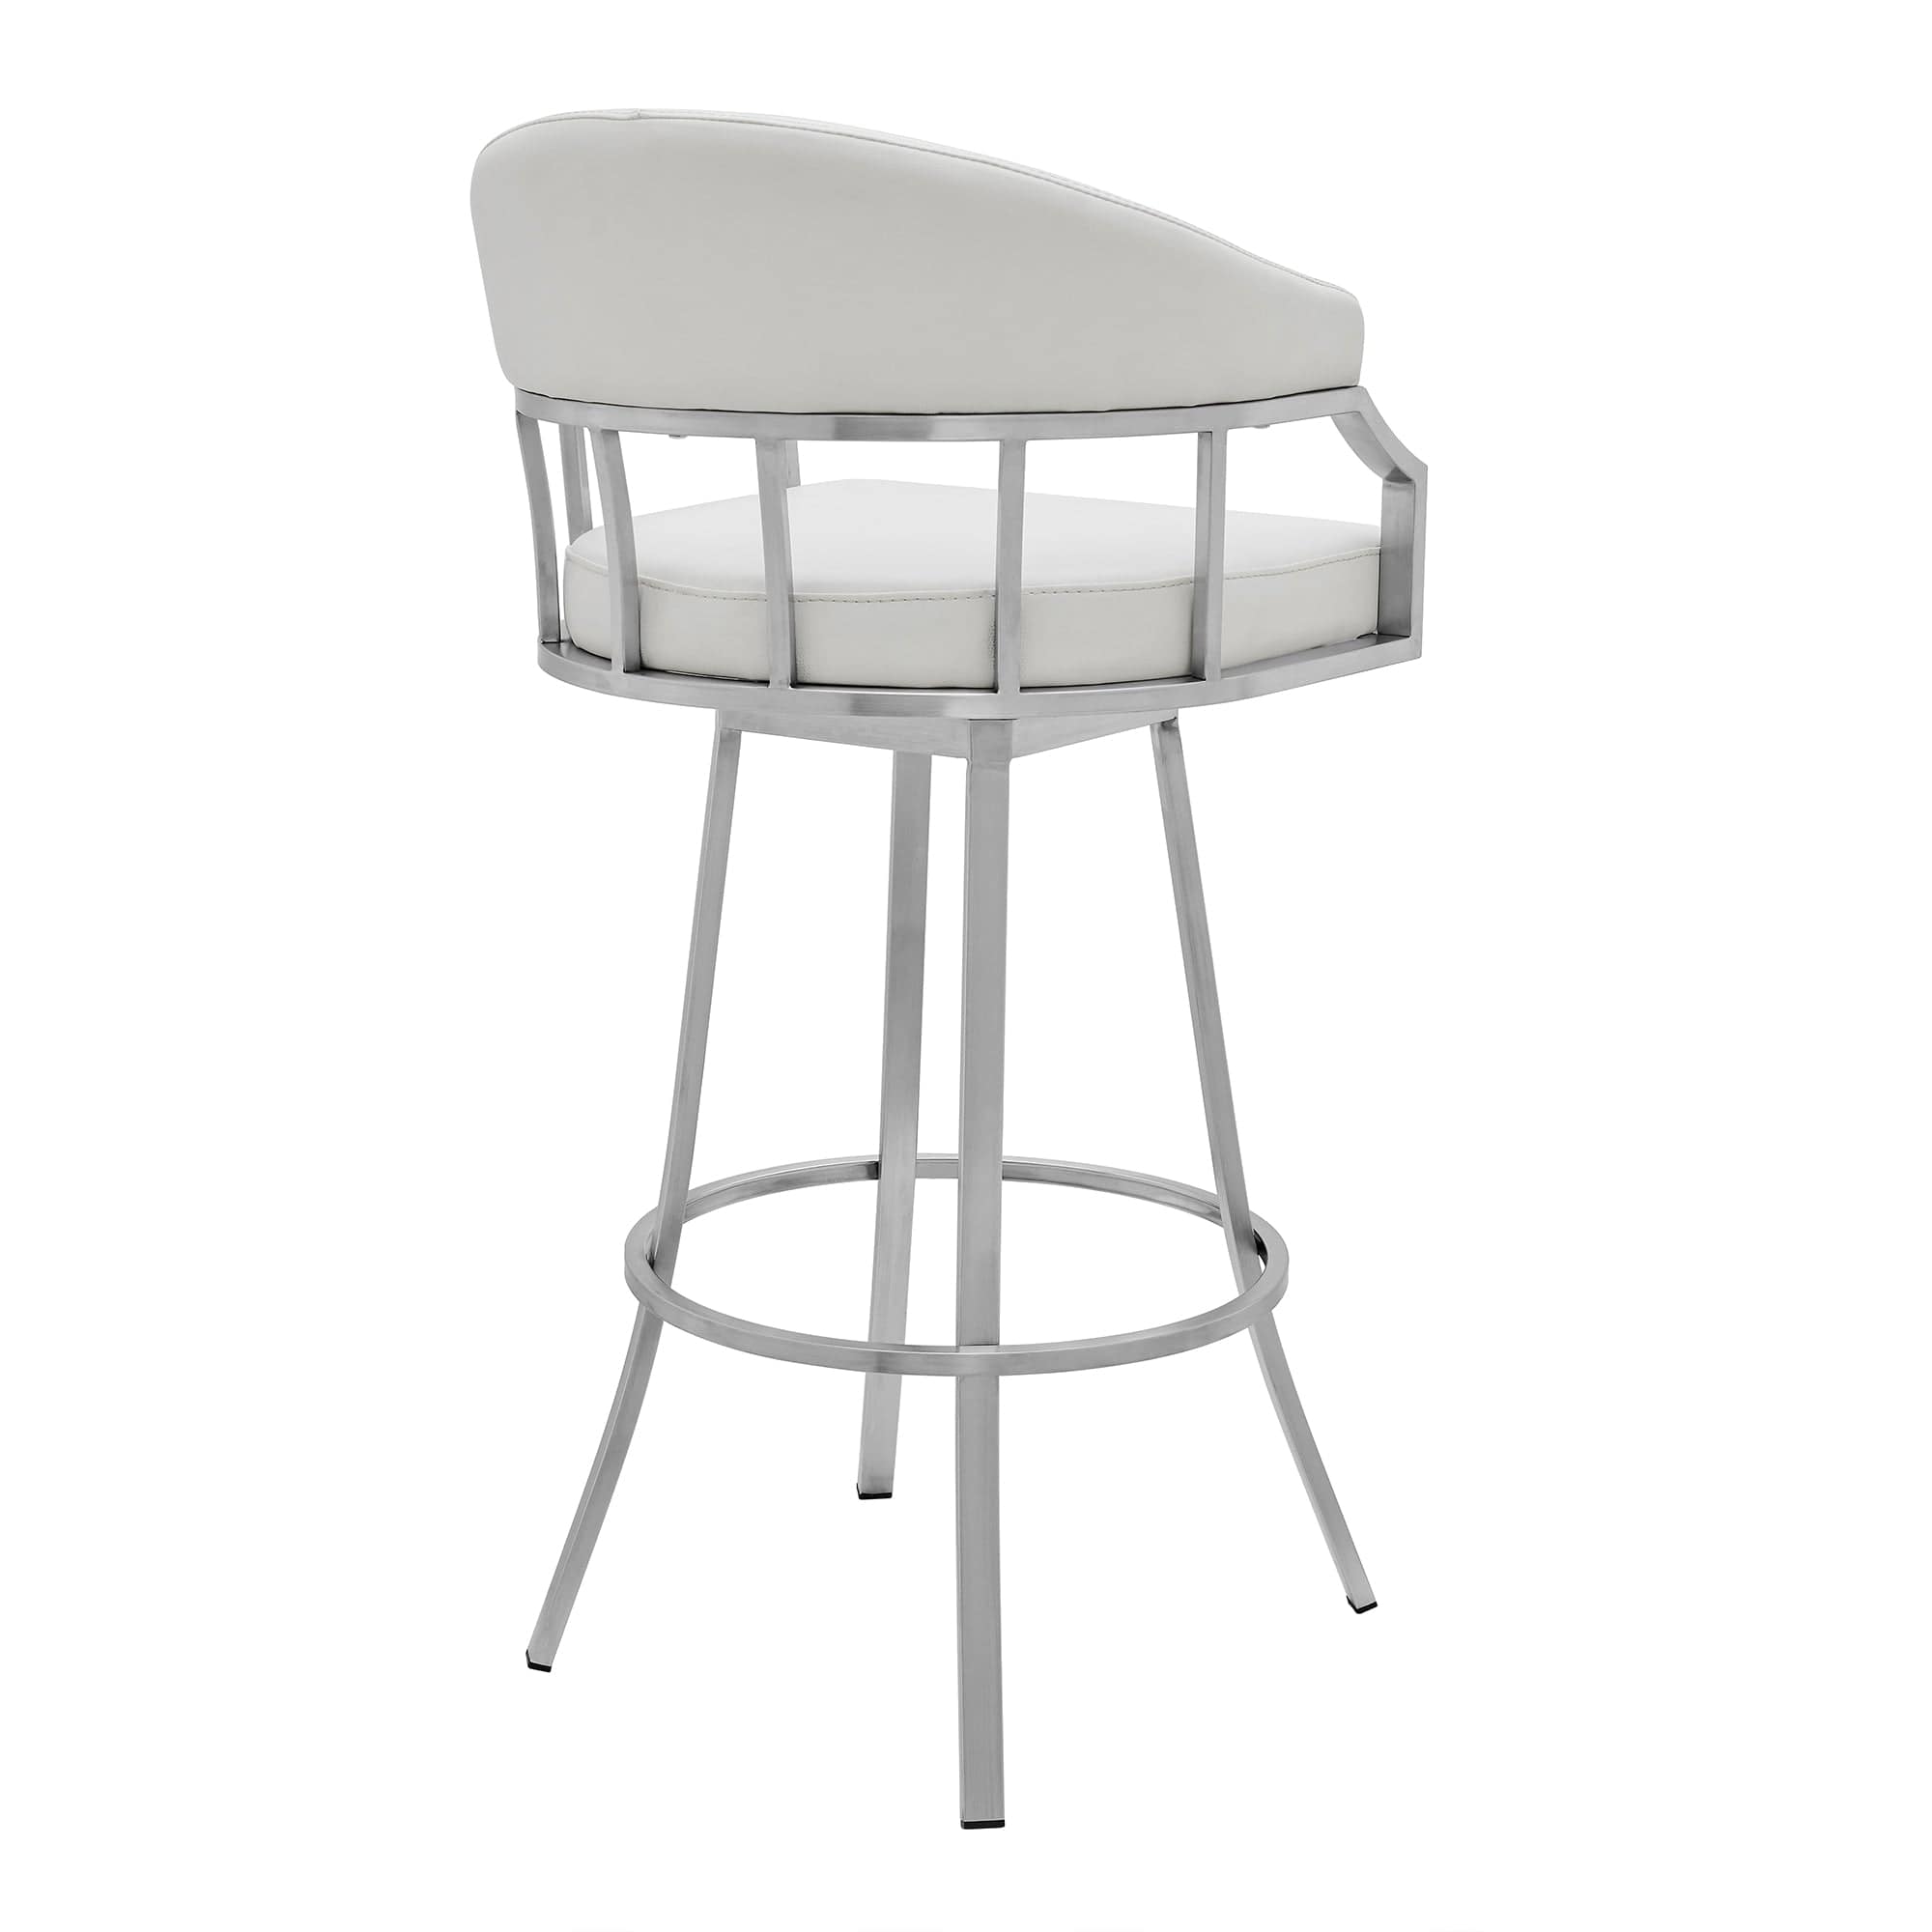 Armen Living Barstool Armen Living | Palmdale Swivel Modern Faux Leather Bar and Counter Stool in Brushed Stainless Steel Finish | 721535752232